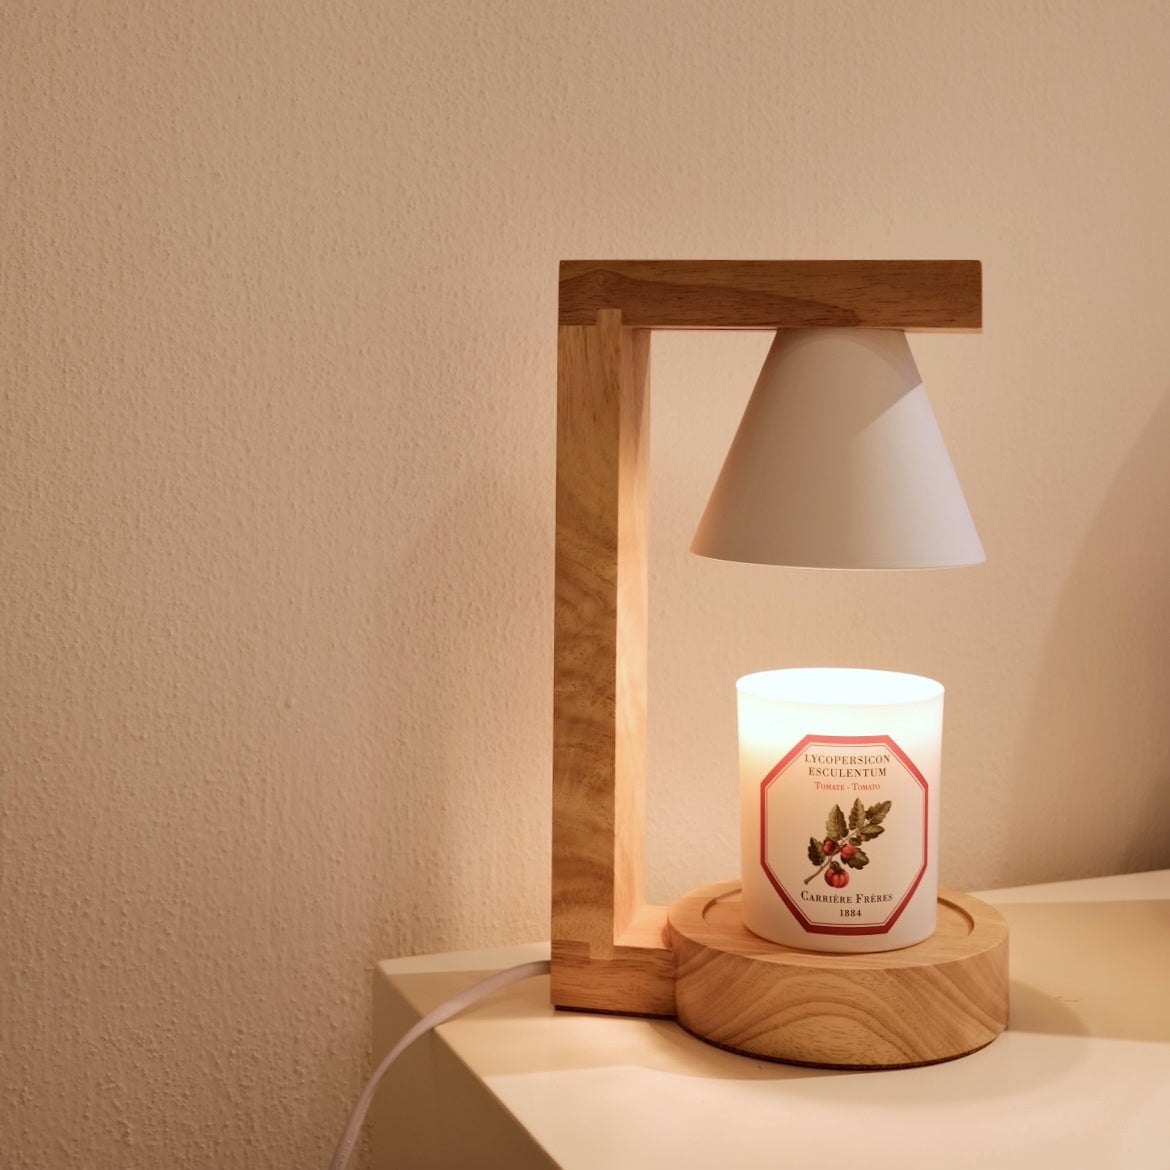 Wooden Candle Warmer 2.0 實木融蠟燈